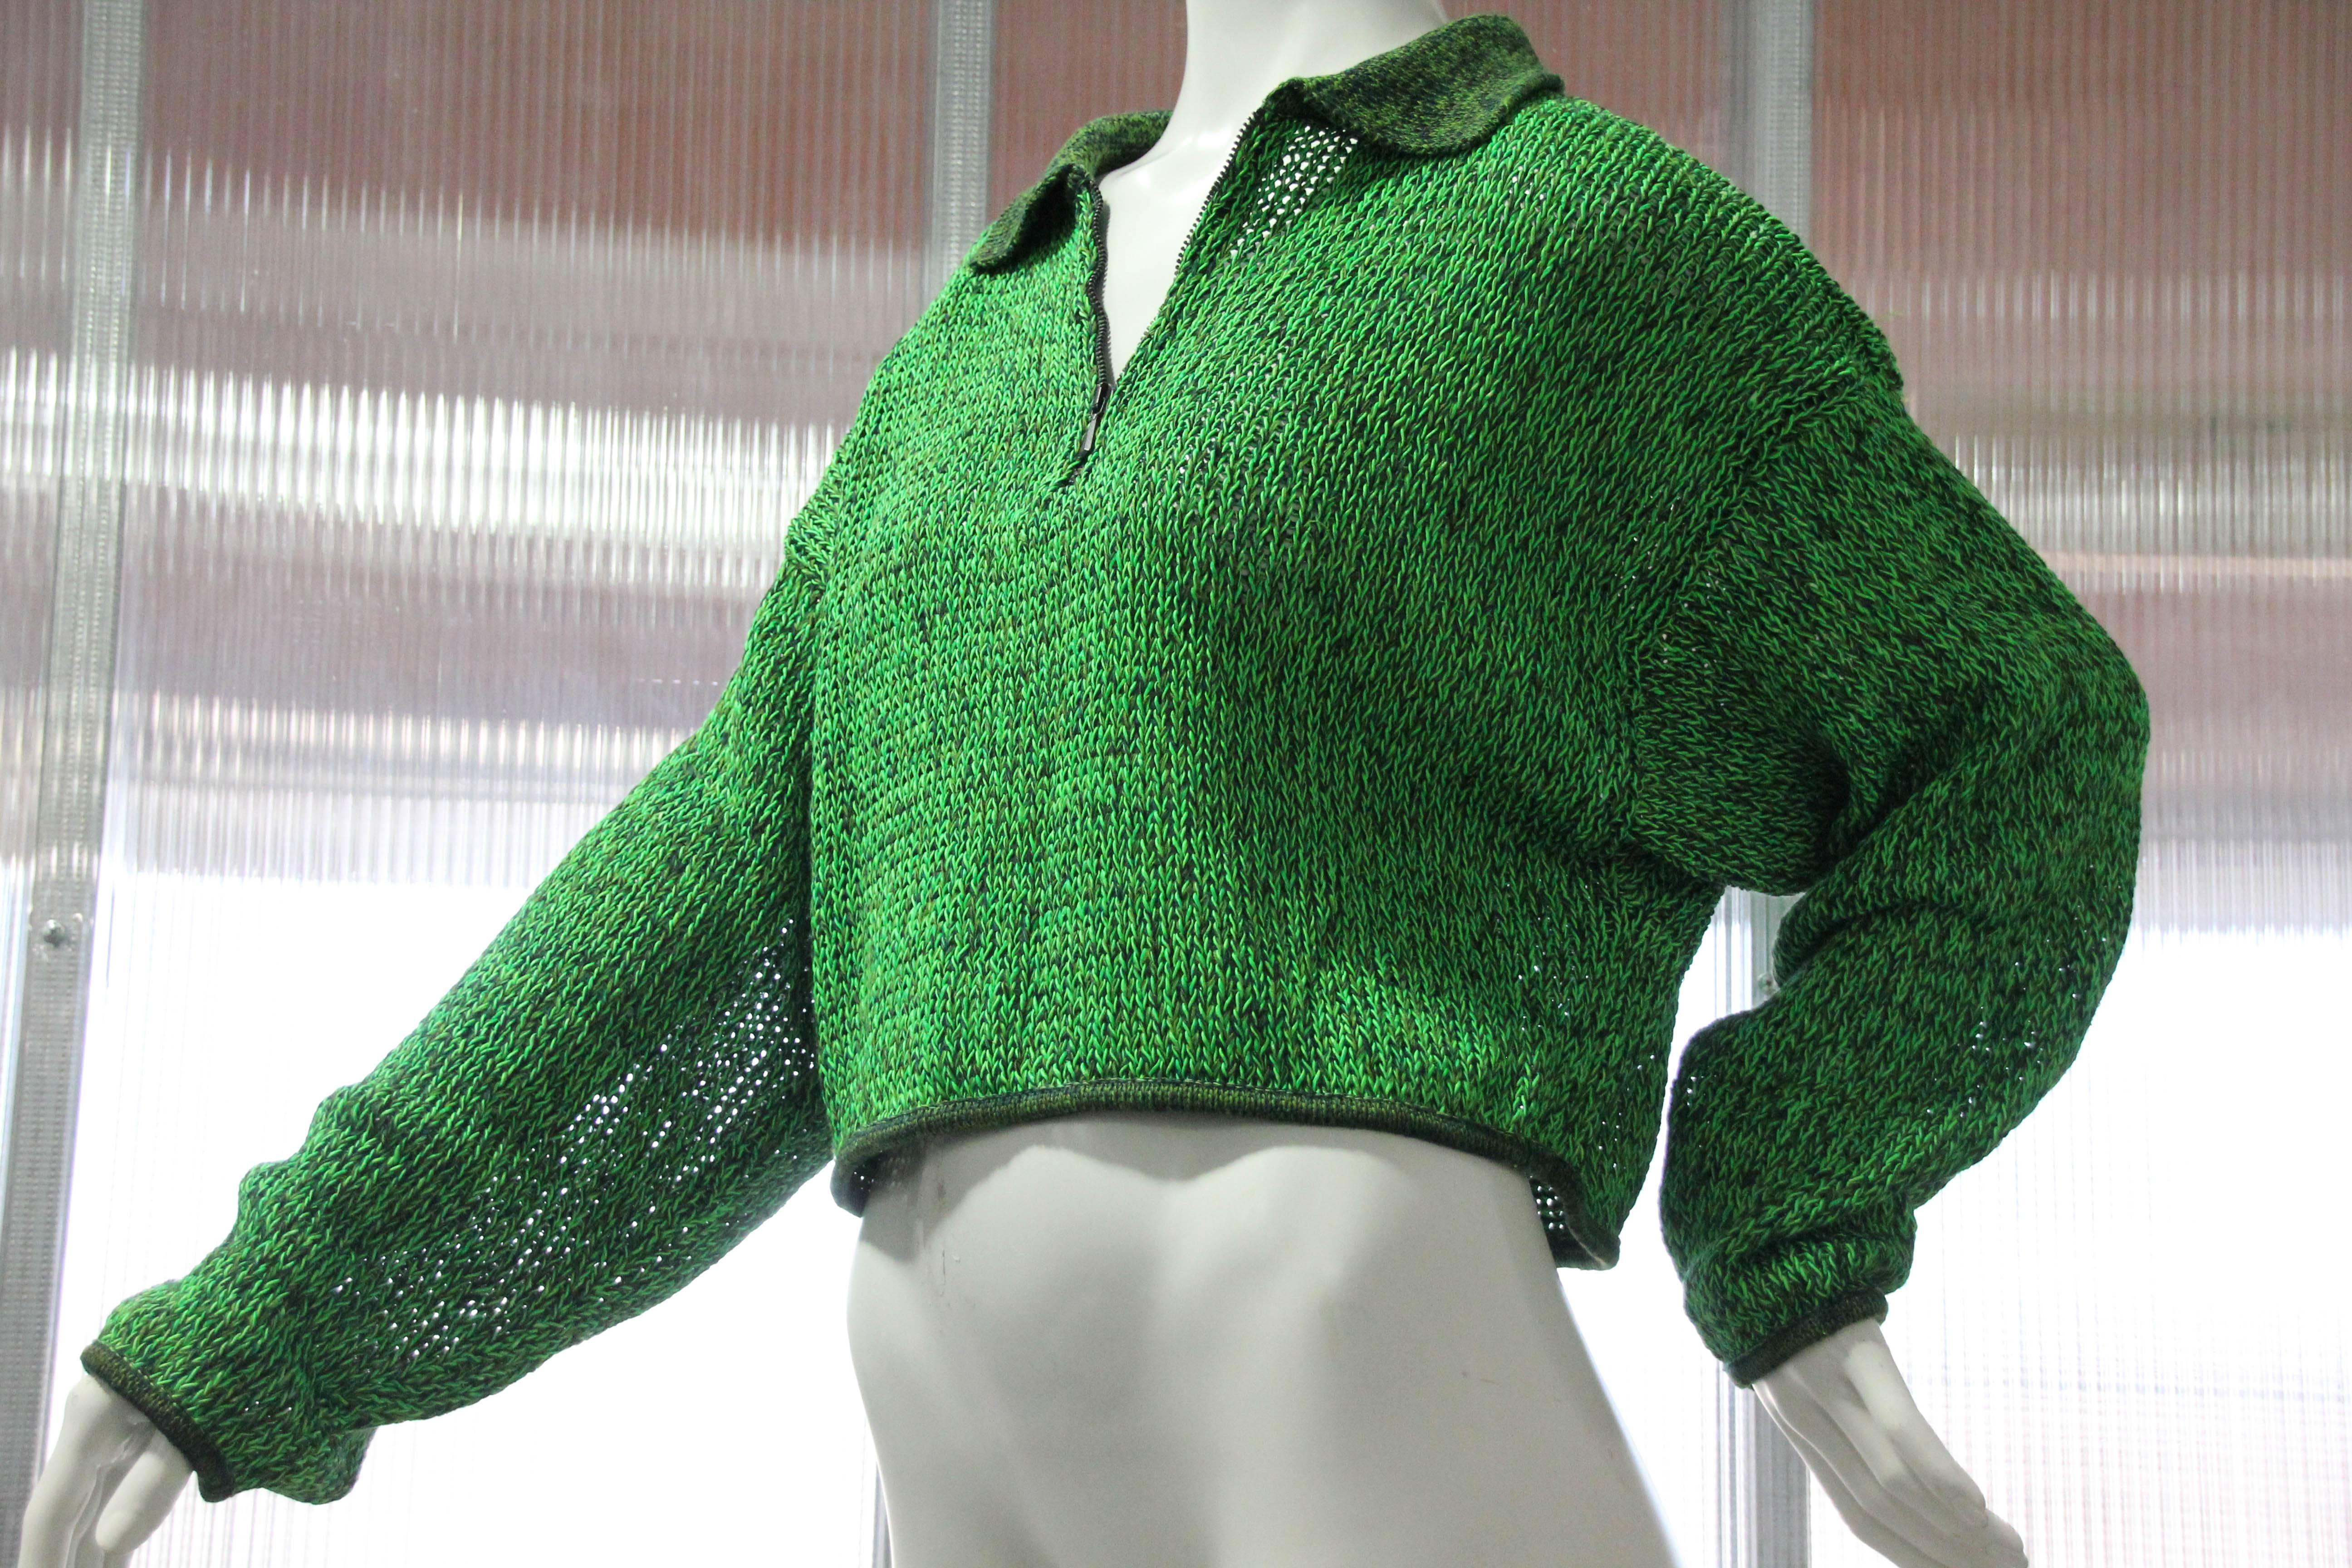 1980s Jean Paul Gaultier - Equator line - Cotton-blend cropped sweater in neon green and black with front zippered polo-style collar. Drop-shoulder, slouchy silhouette. 